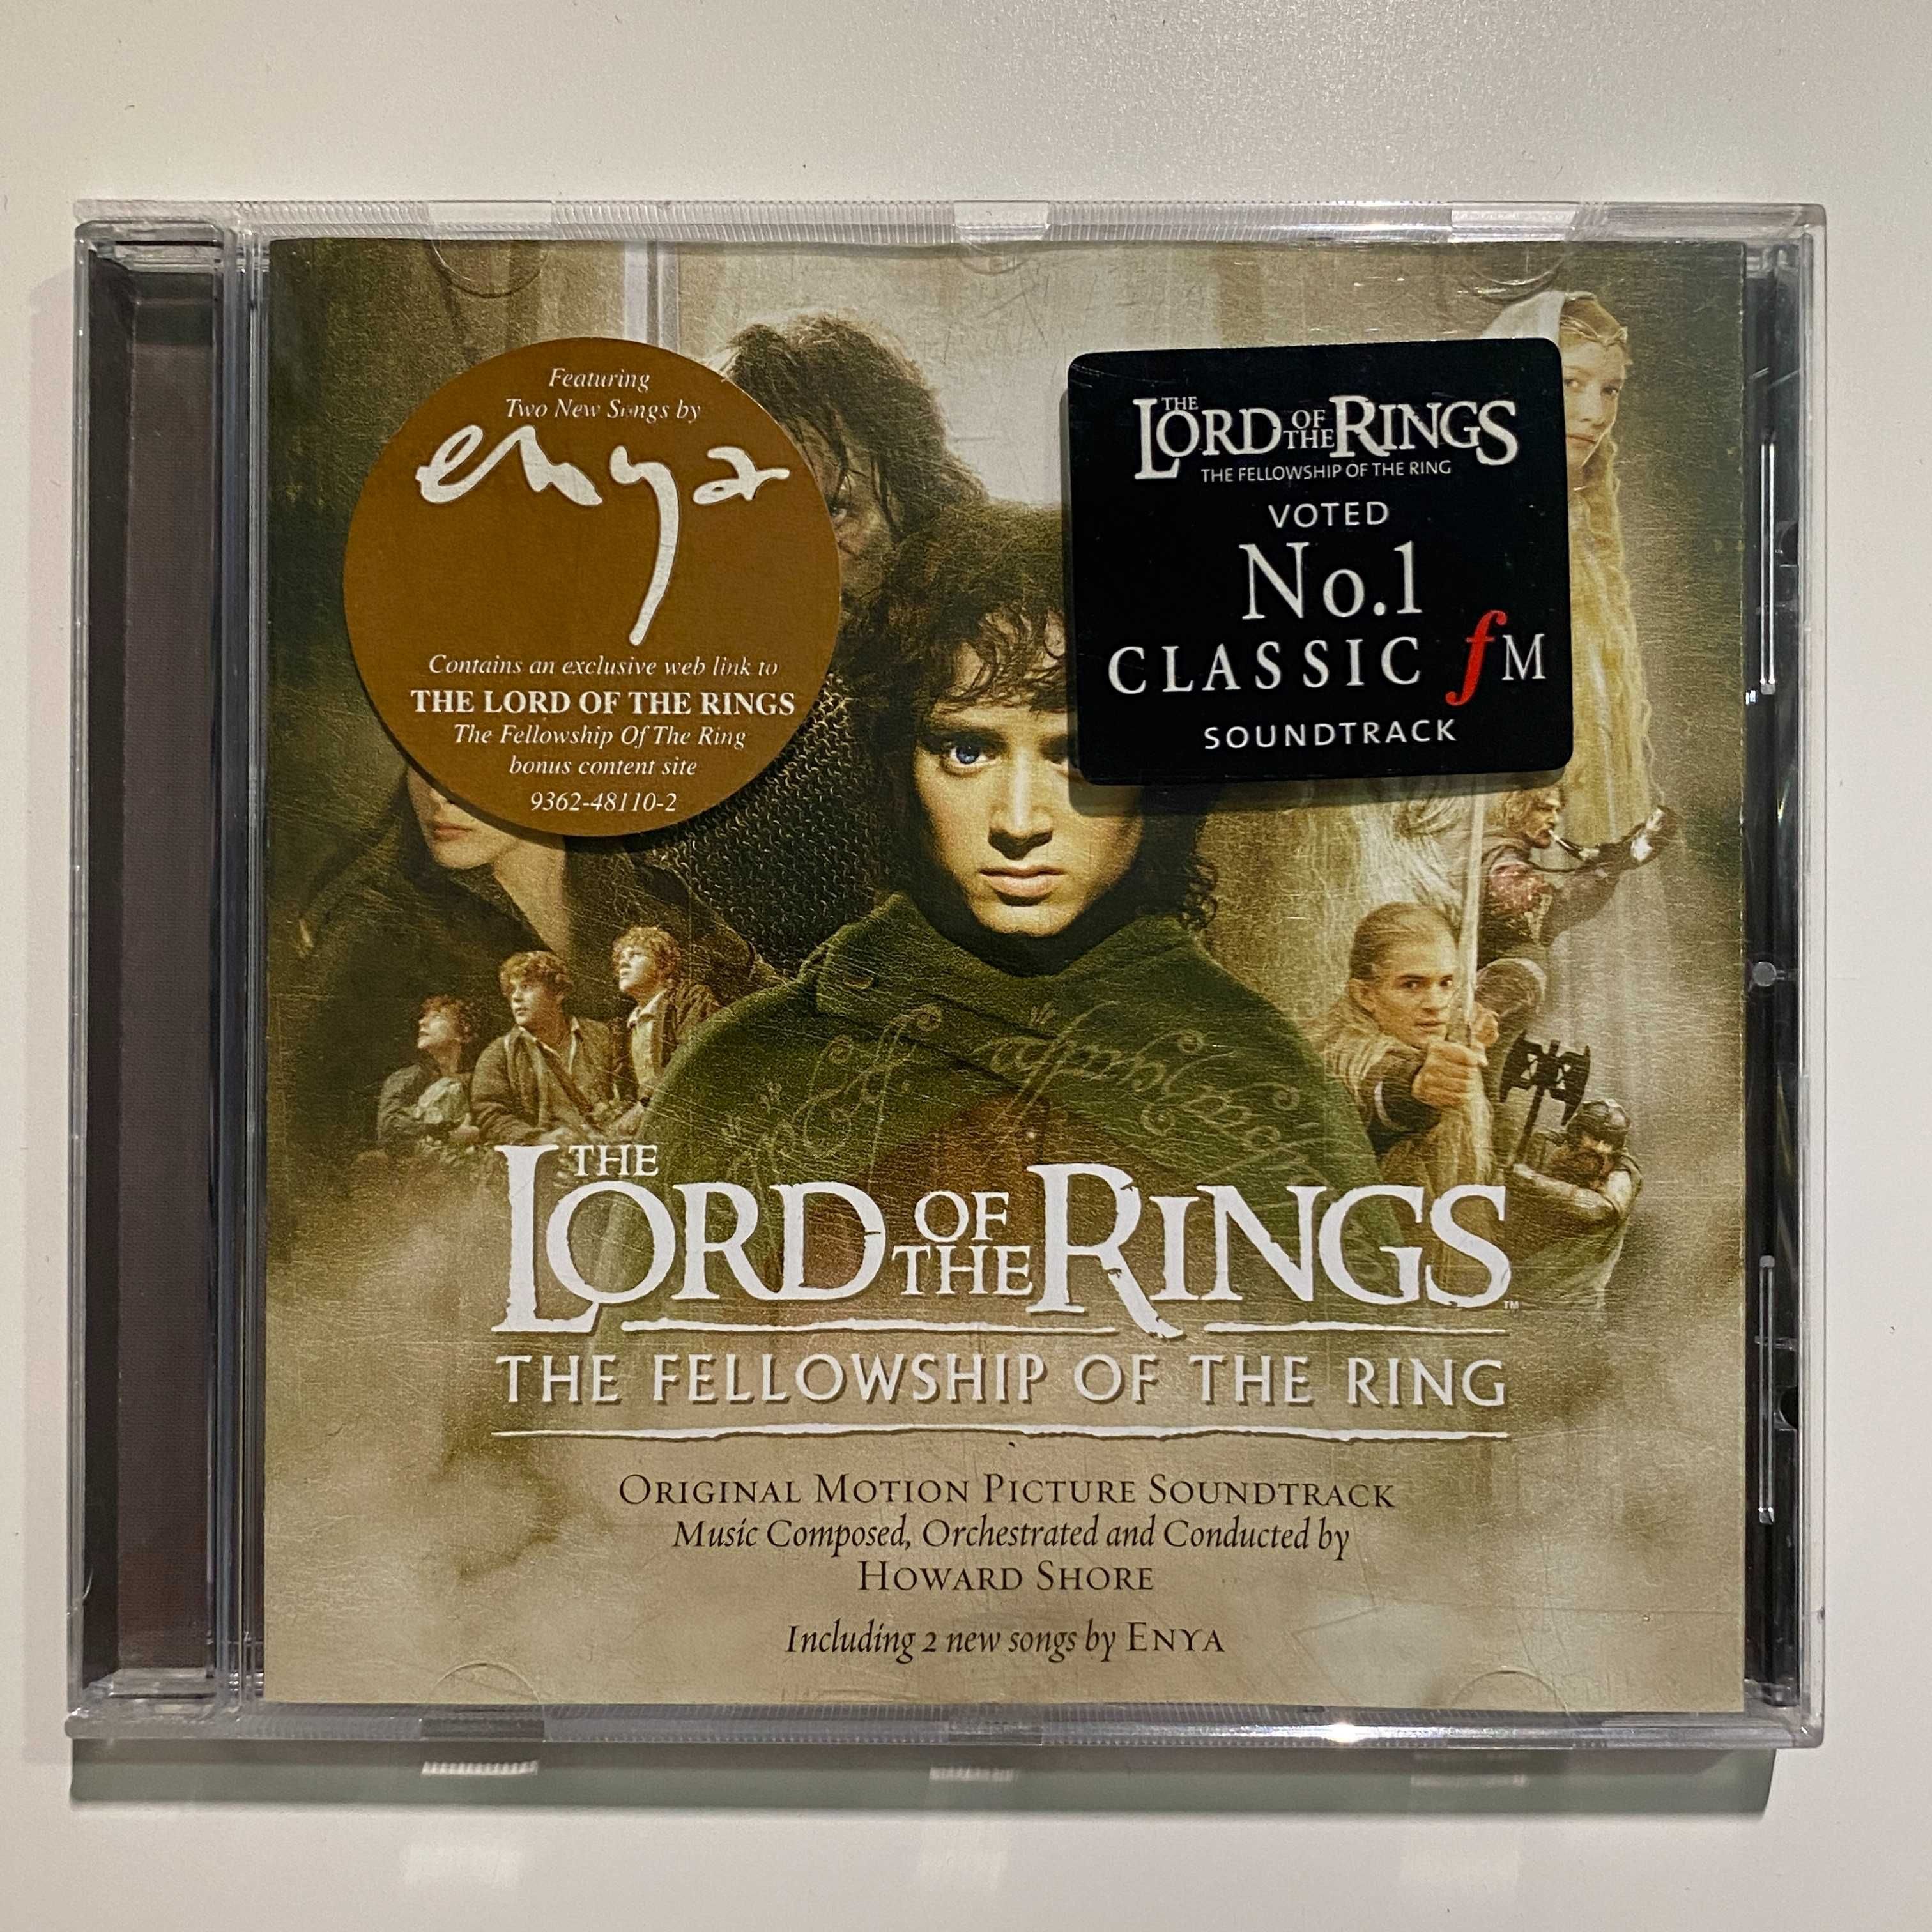 The Lord Of The Rings - the Fellowship Of The Ring - Soundtrack CD